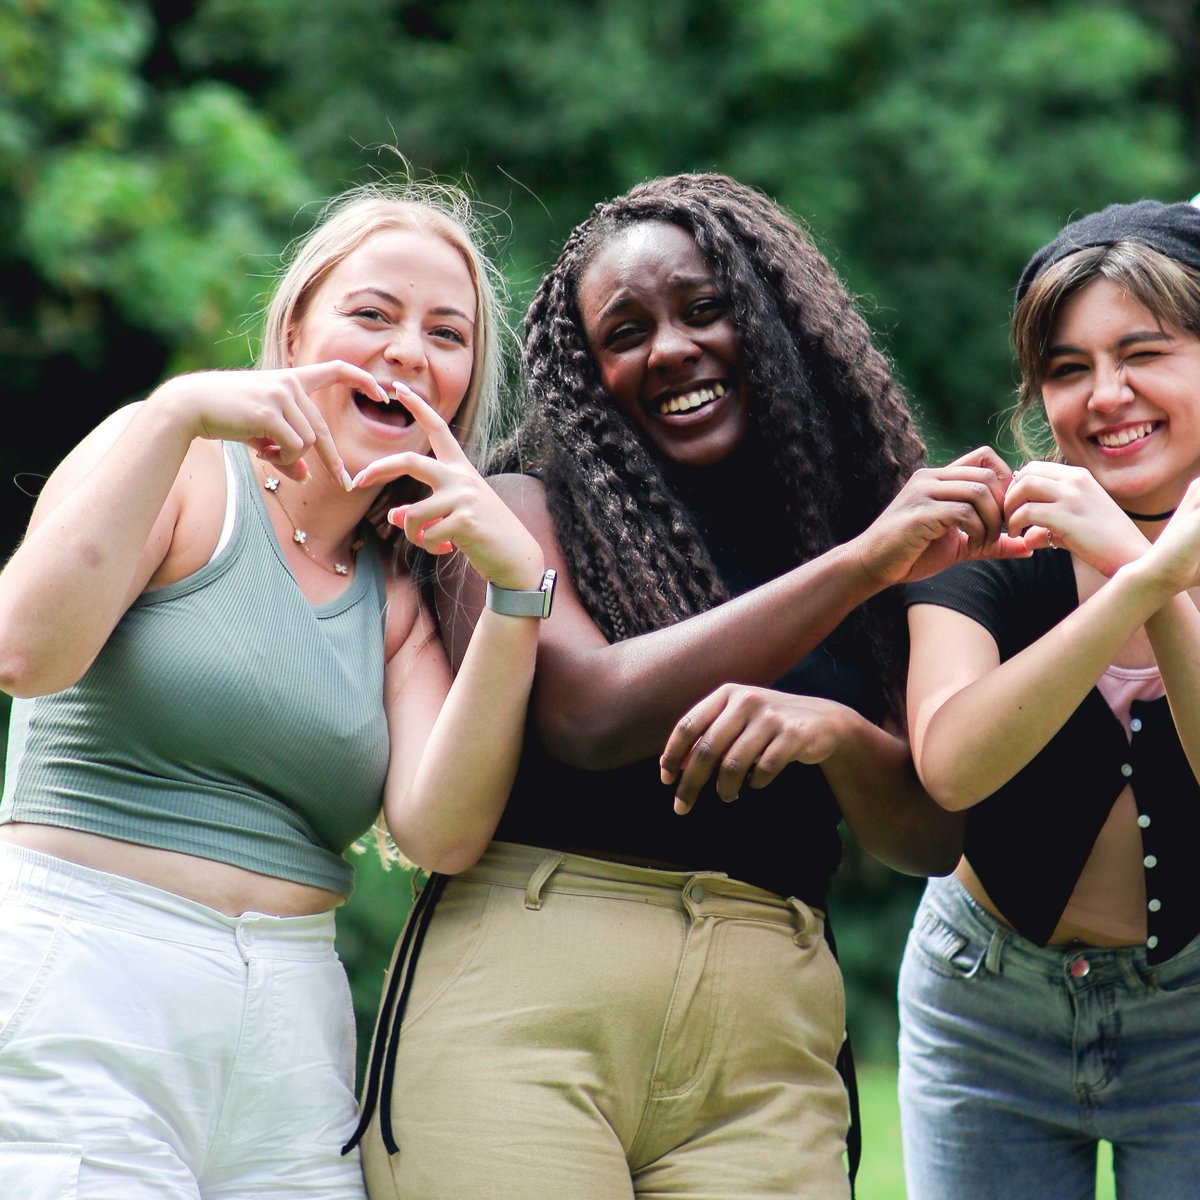 This week is Mental Health Awareness Week 🗣️ The wellbeing of #TeamMDX is really important to us - so we've created a Wellness Hub for all the support you might need 😊 As always, our DMs are open for a chat ❤️ Check it out here 👉 mdxwellnesshub.com